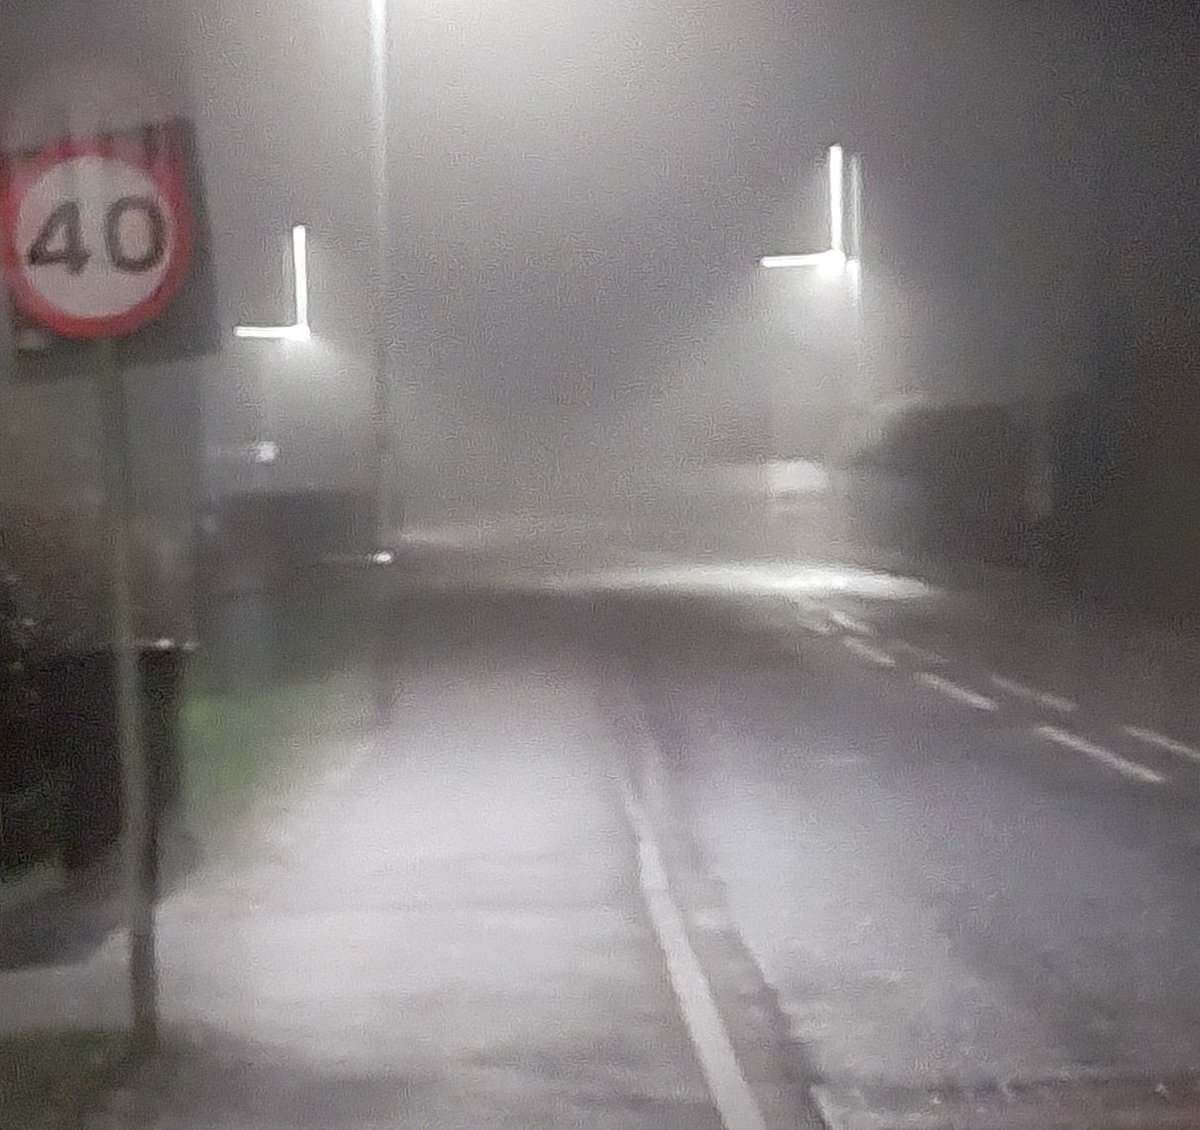 It's a bit of a 'pea-souper' here in rural Leicestershire tonight...didn't stop me walking though!🏃‍♀️ #thickfog #village #10000steps #distancechallenge #walking #Leicestershire